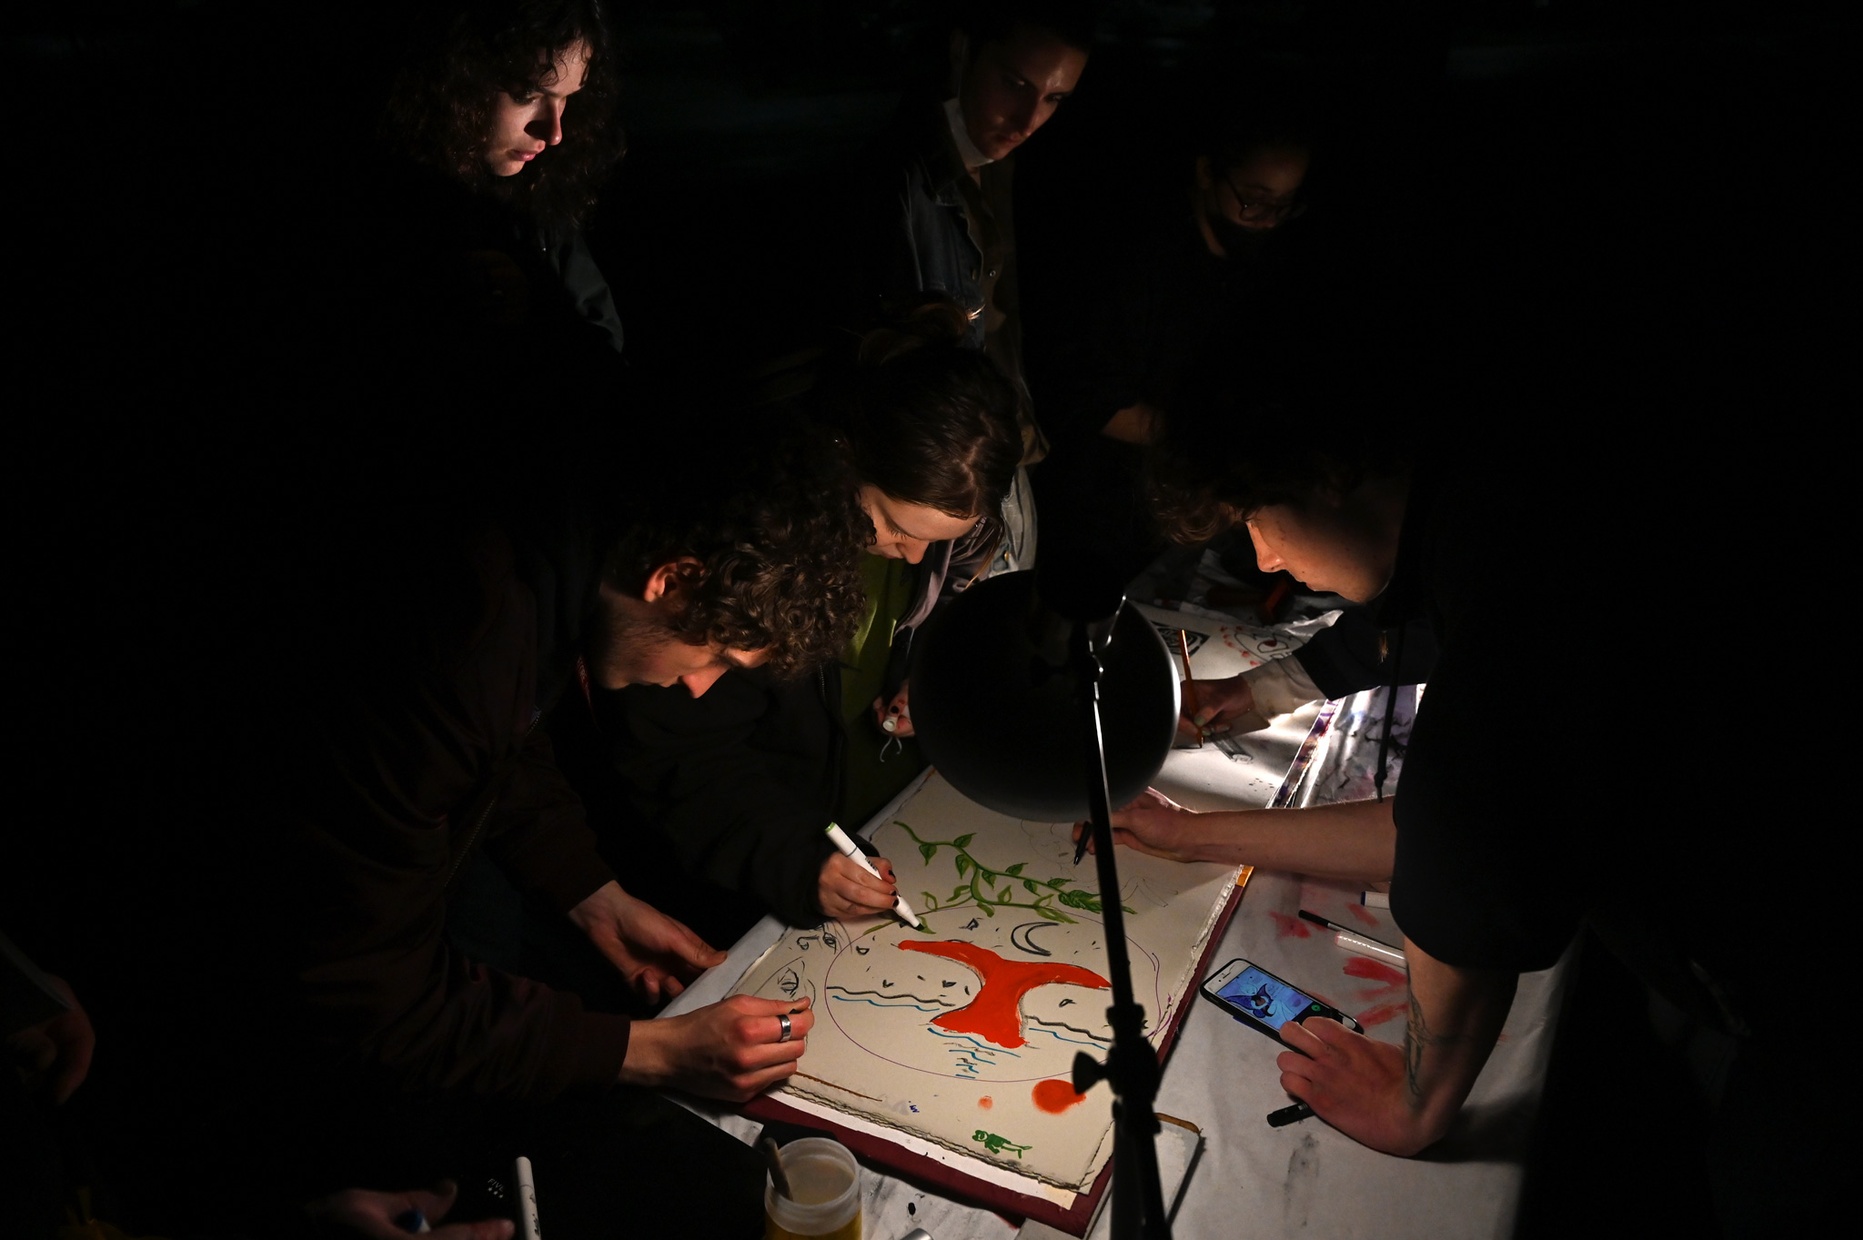 Multiple people gather around a large book to draw on it.